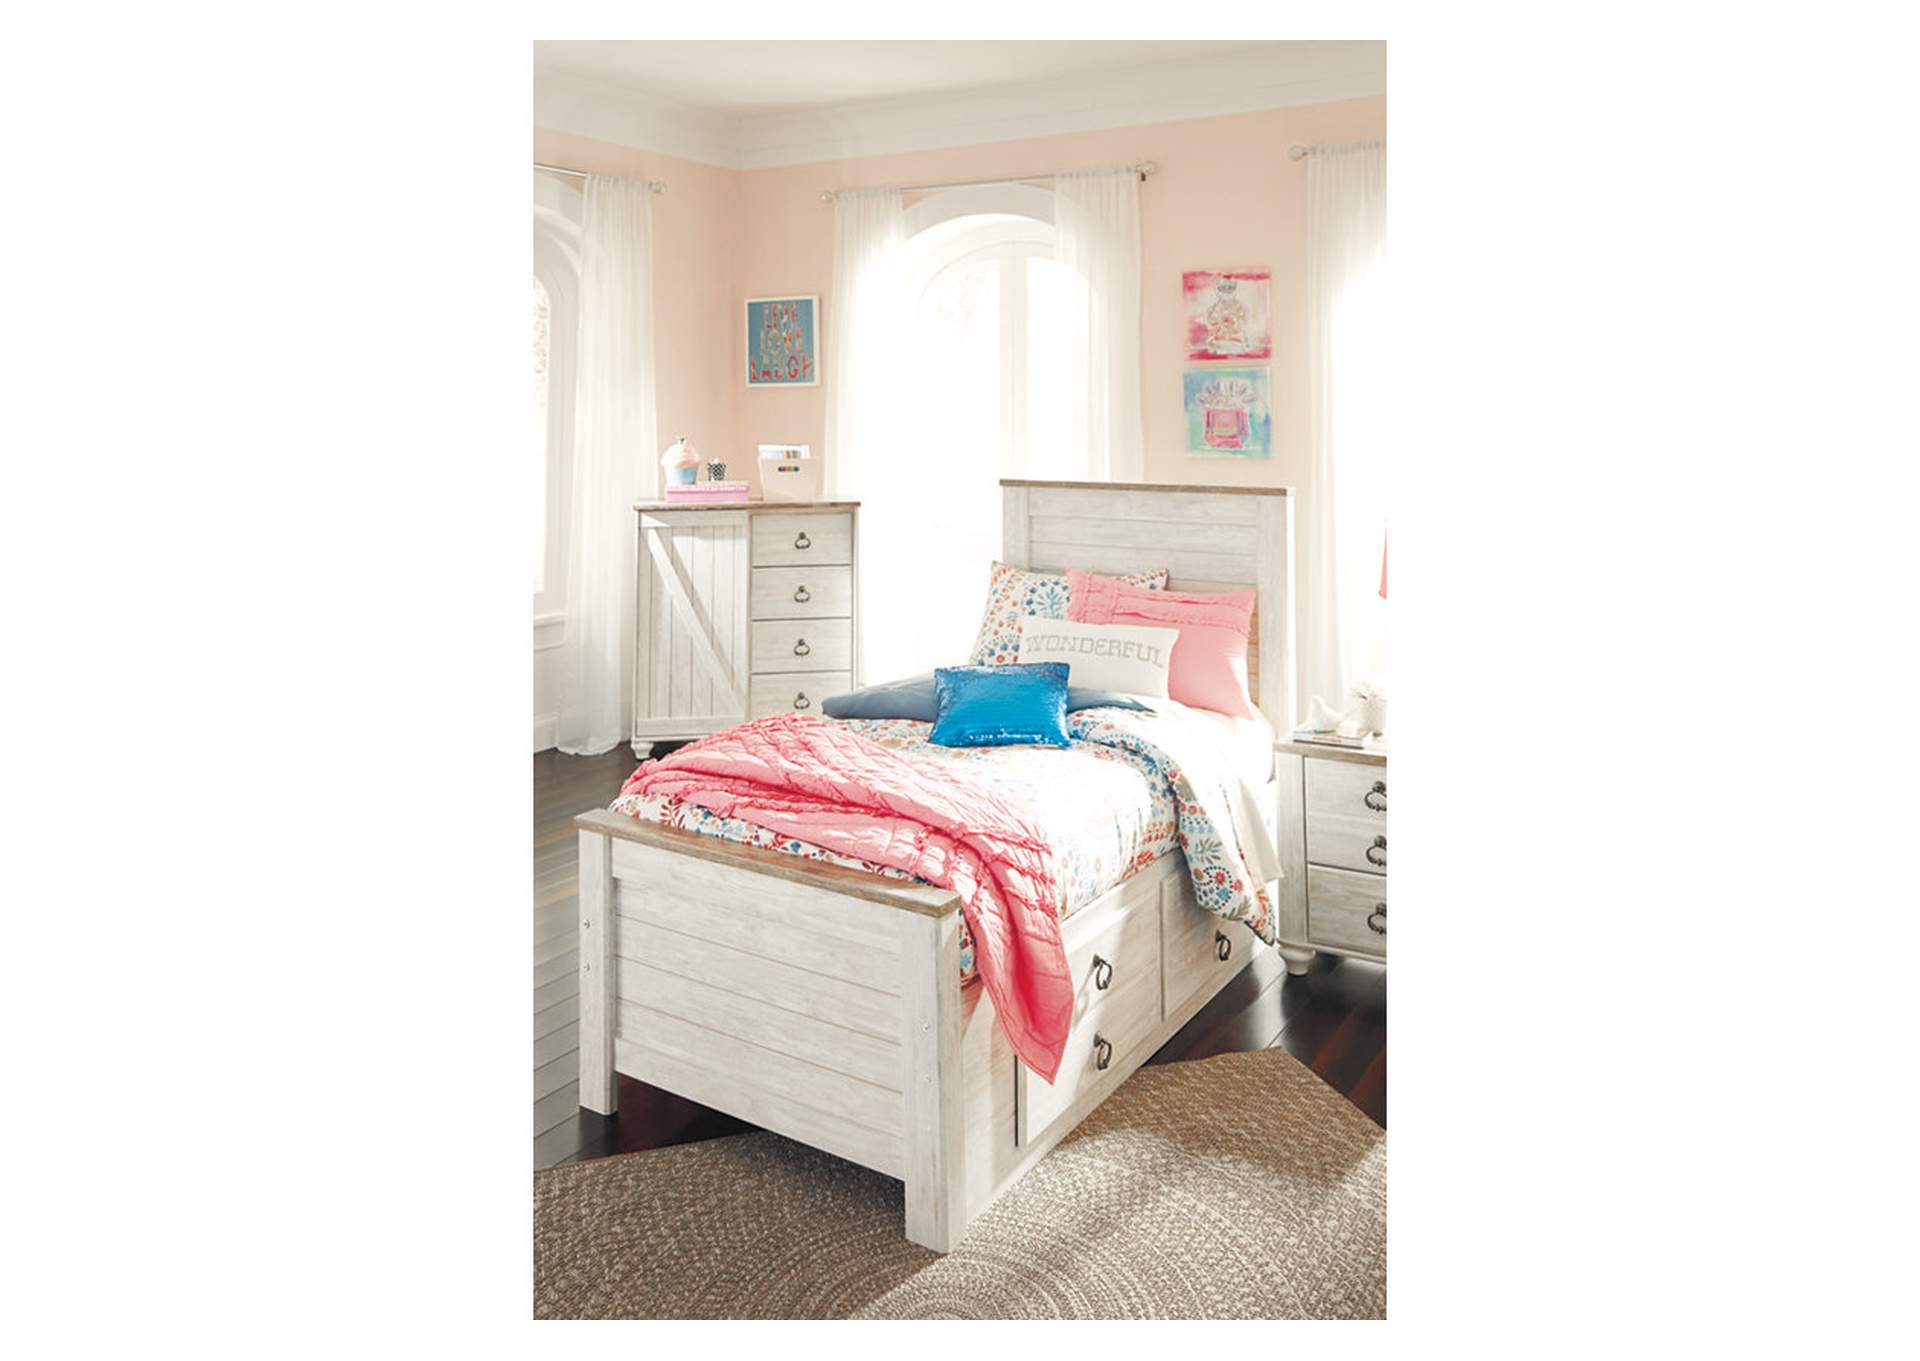 Willowton Twin Panel Bed with 2 Storage Drawers,Signature Design By Ashley